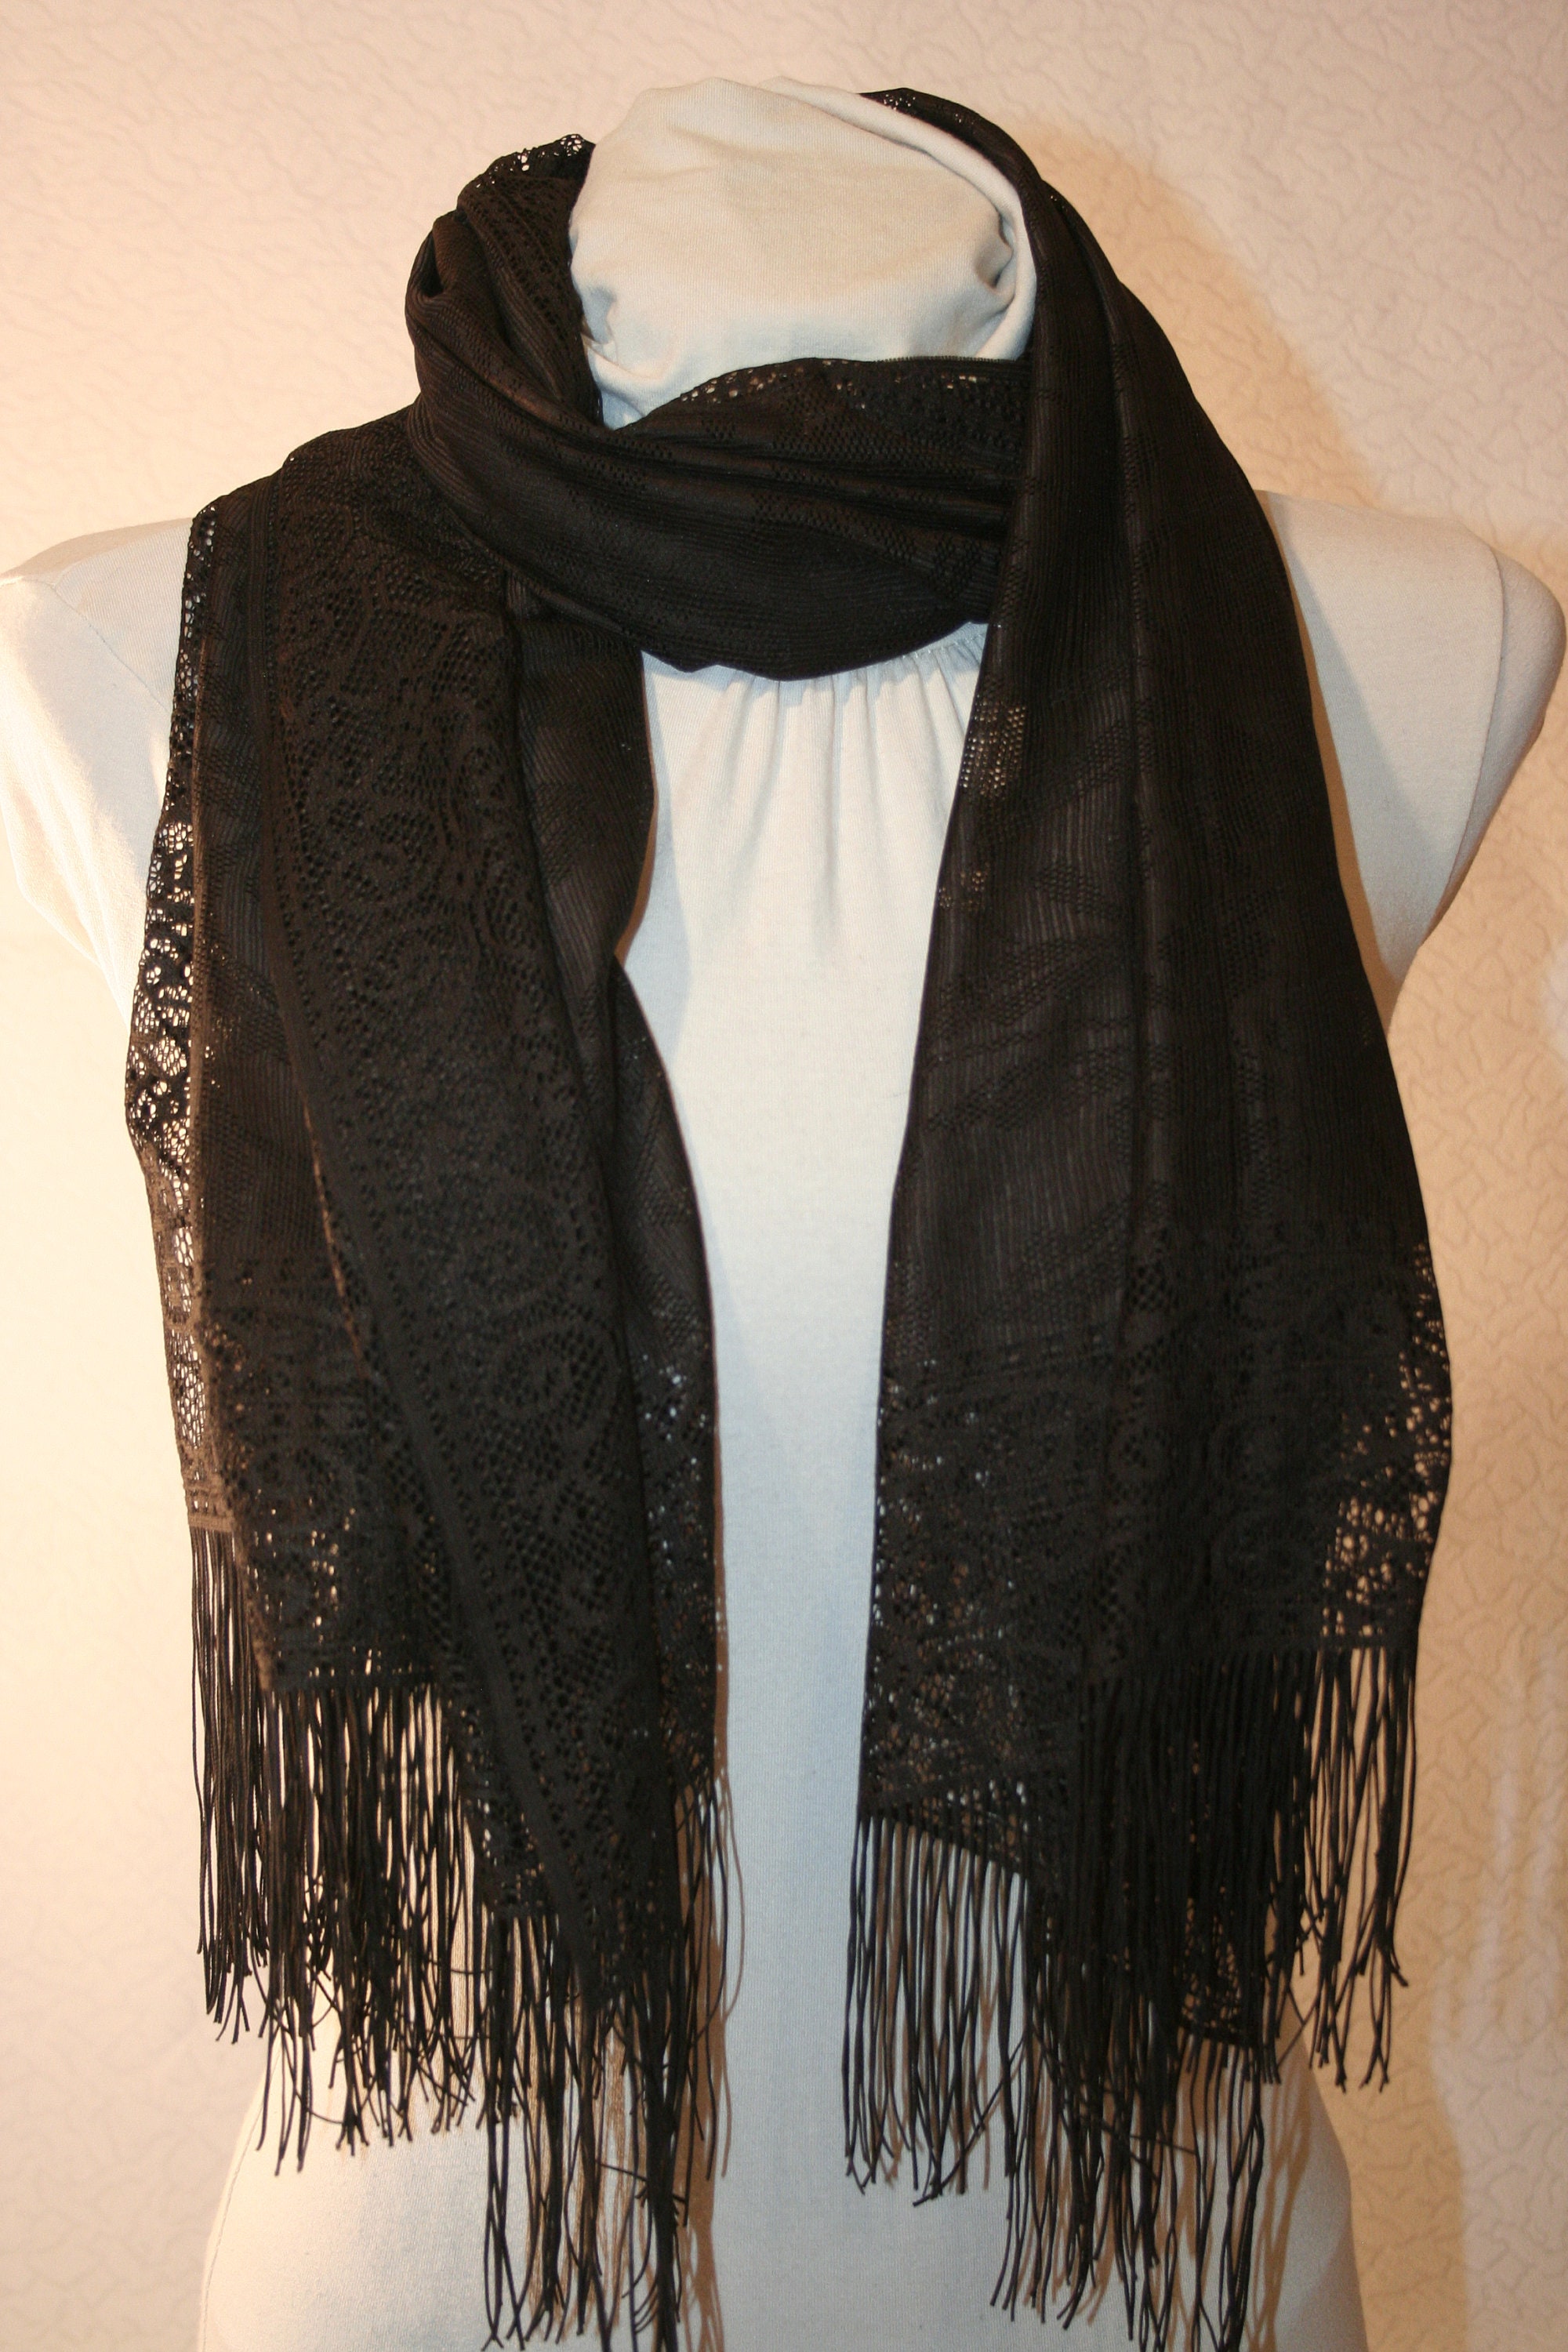 Exclusive crocheted style transparent scarf in perfect condition Dark brown almost black